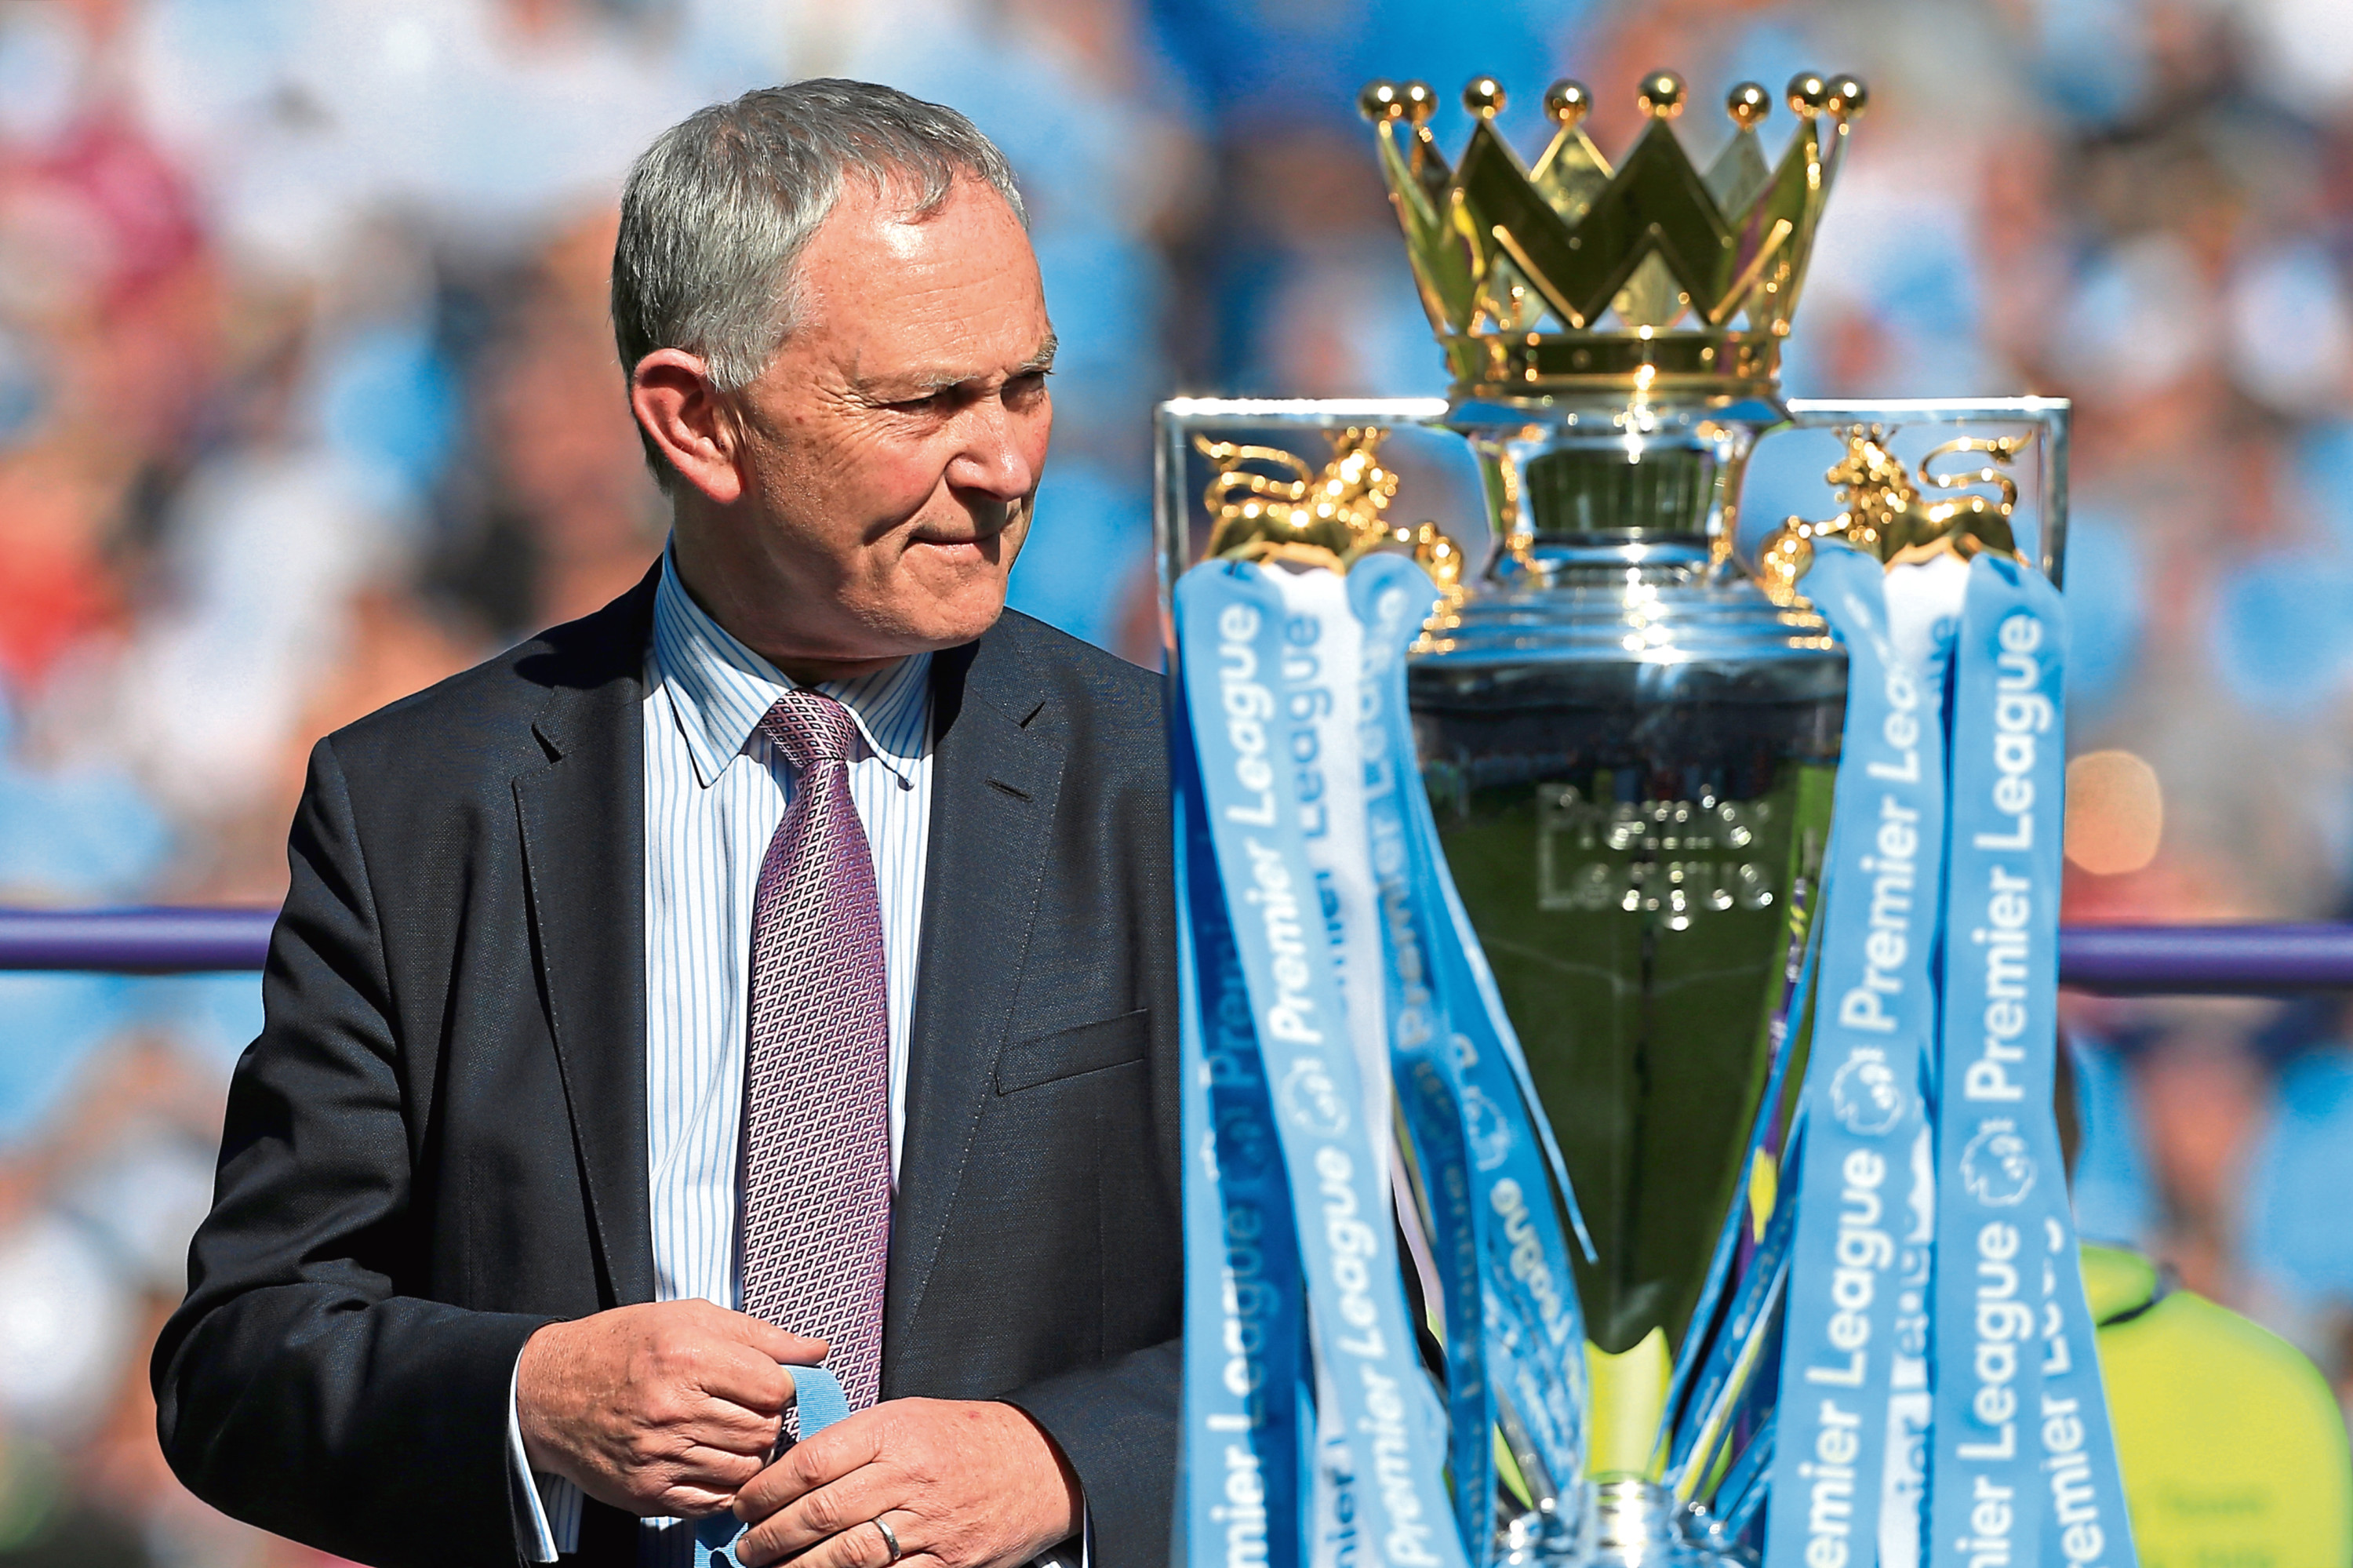 Premier League Chief Executive Richard Scudamore stands alongside the trophy ahead of the presentation after the Premier League match between Manchester City and Huddersfield Town at the Etihad Stadium on May 6, 2018 in Manchester, England. (Simon Stacpoole/Offside/Getty Images)